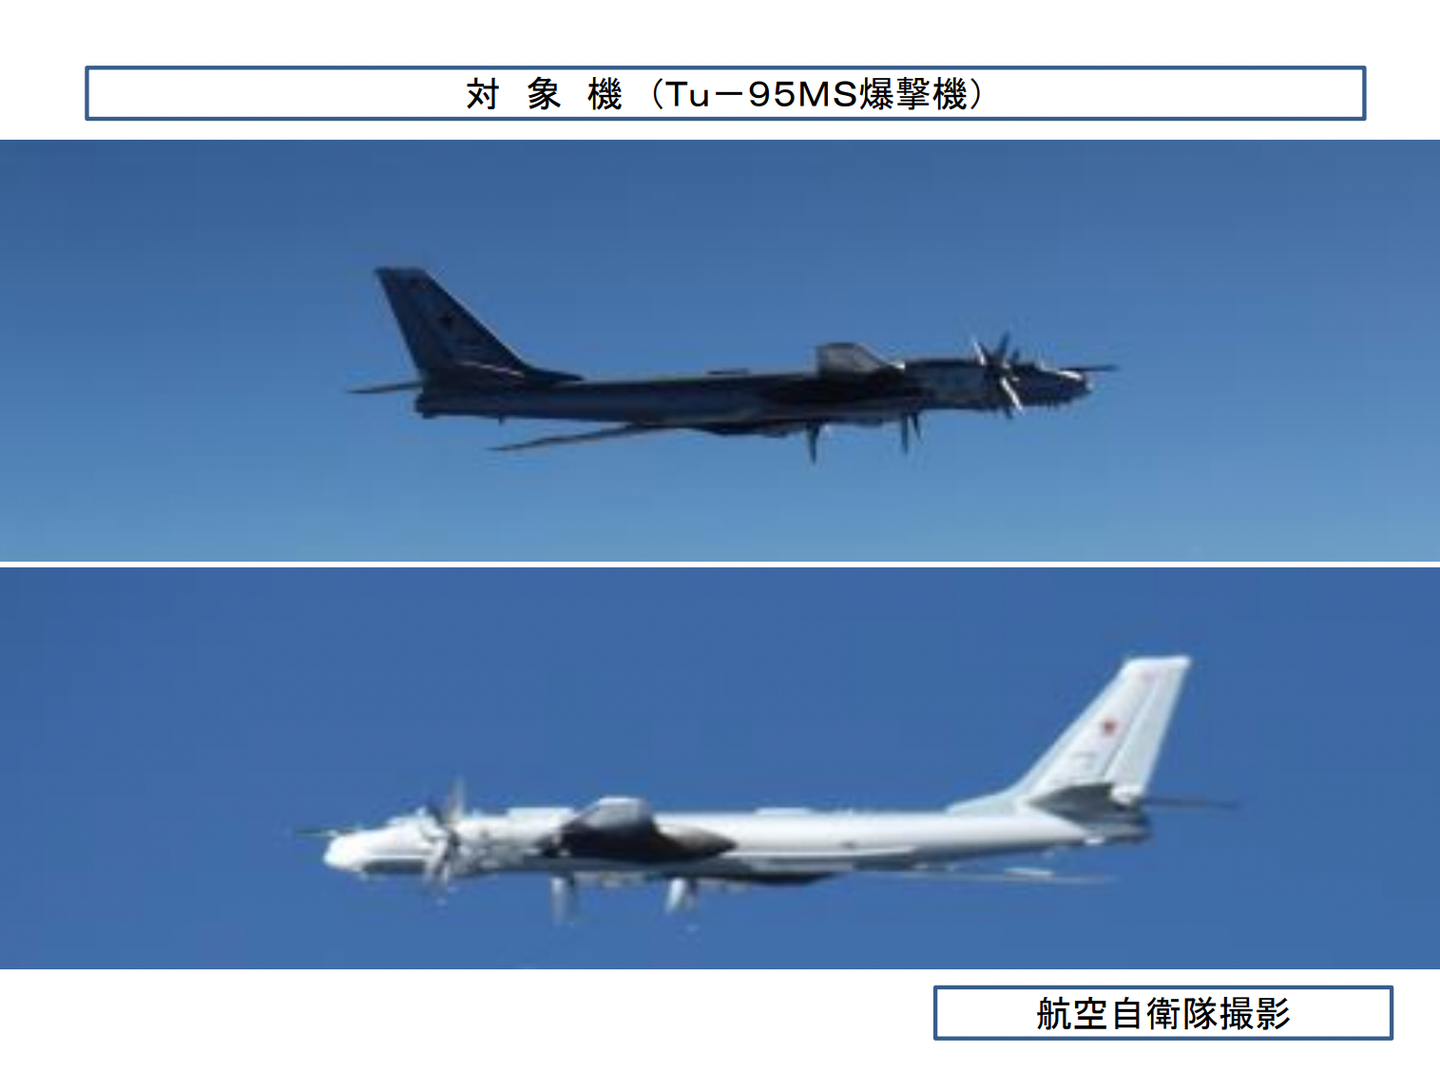 Another Japanese Ministry of Defense handout from today showing two Tu-95MS bombers. <em>JASDF</em>